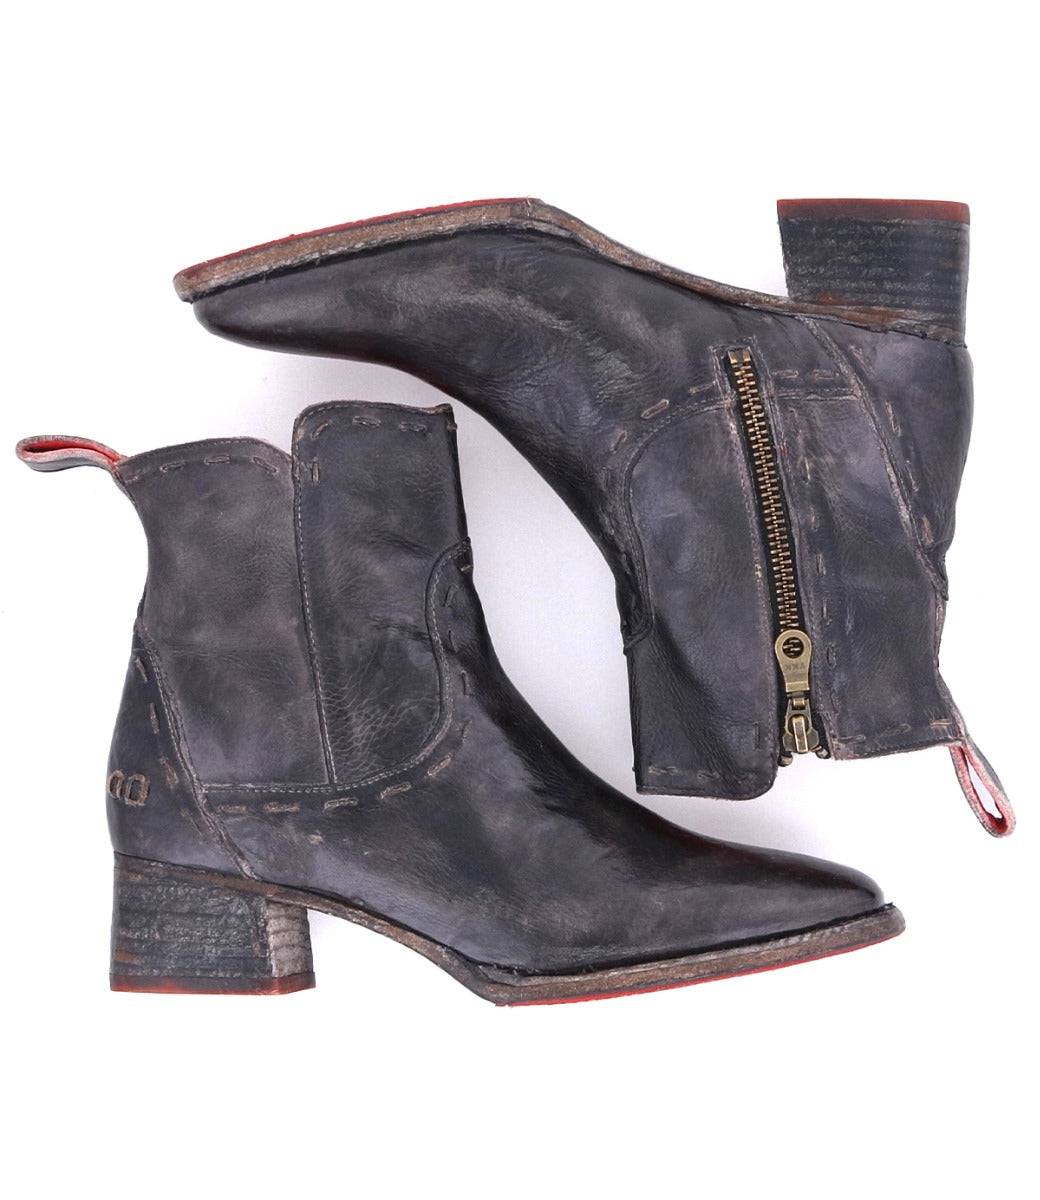 A pair of Merryli women's black leather ankle boots from Bed Stu.